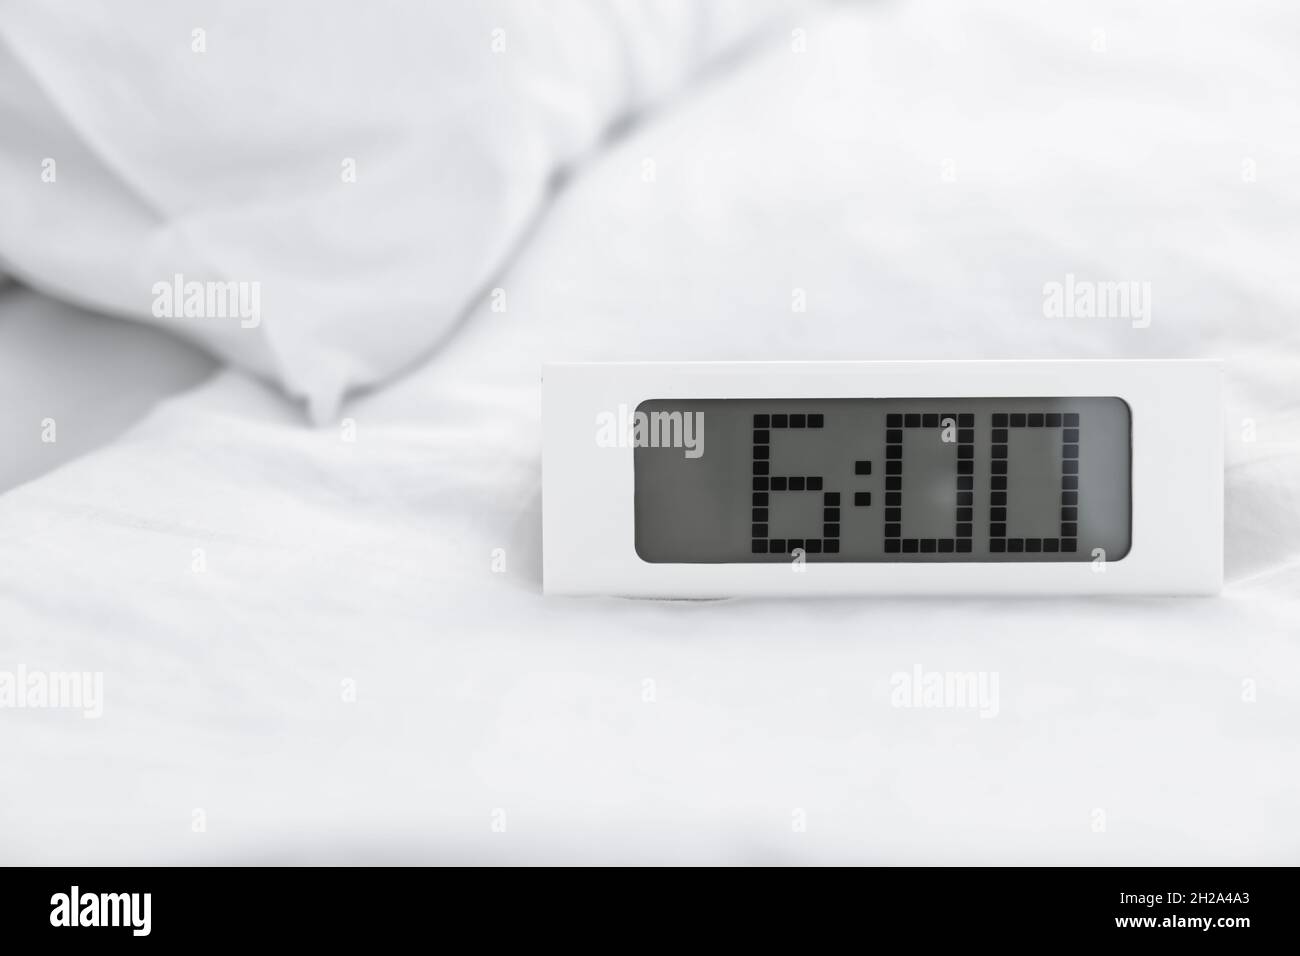 Digital alarm clock on bed. Time to wake up Stock Photo